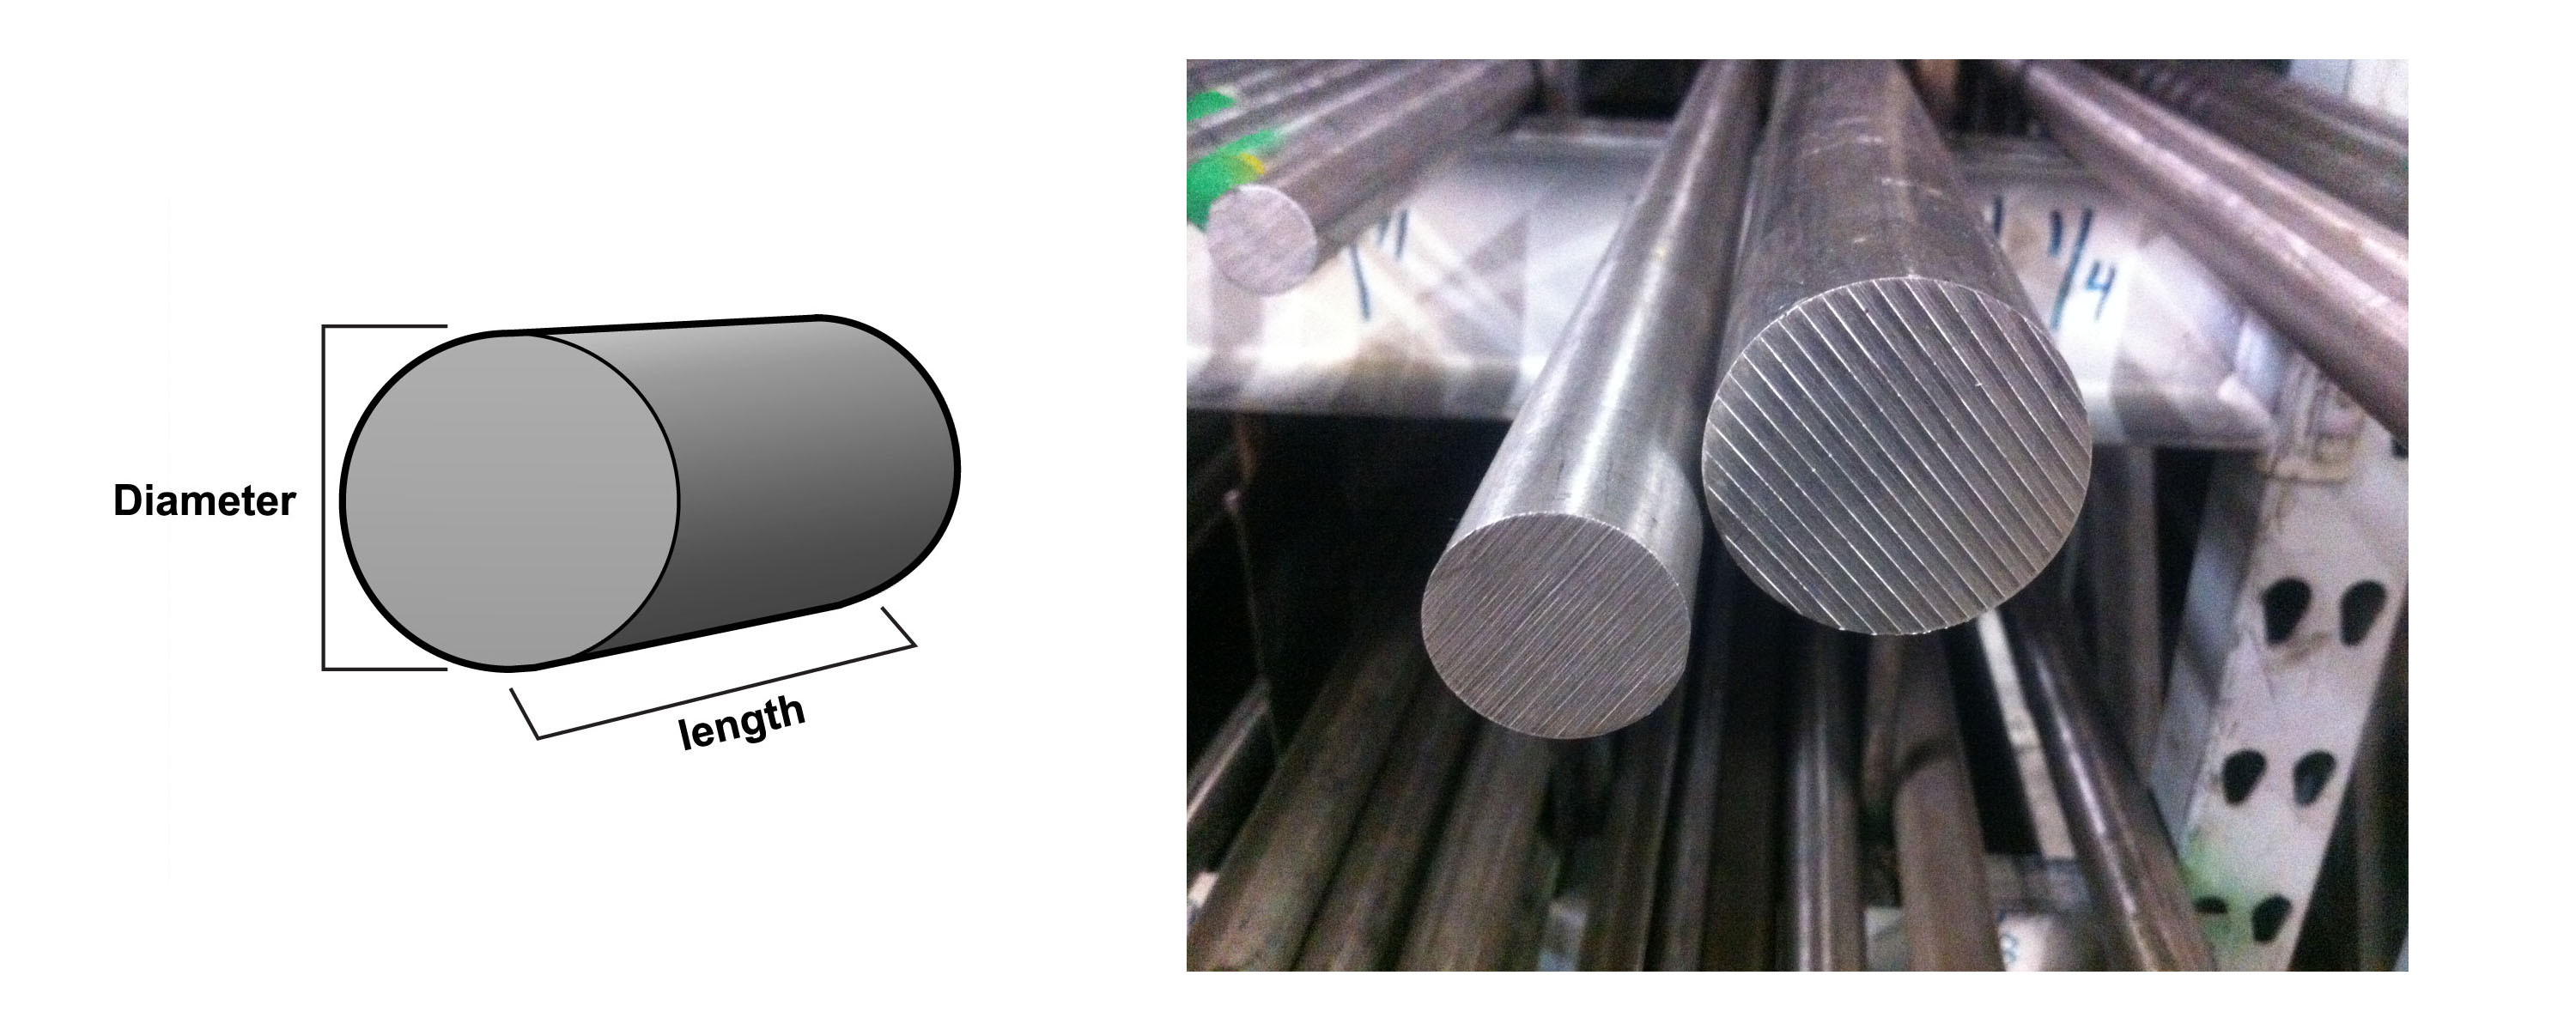 84.0 2.375 Stainless Round Bar 303-Annealed Cold Finish 